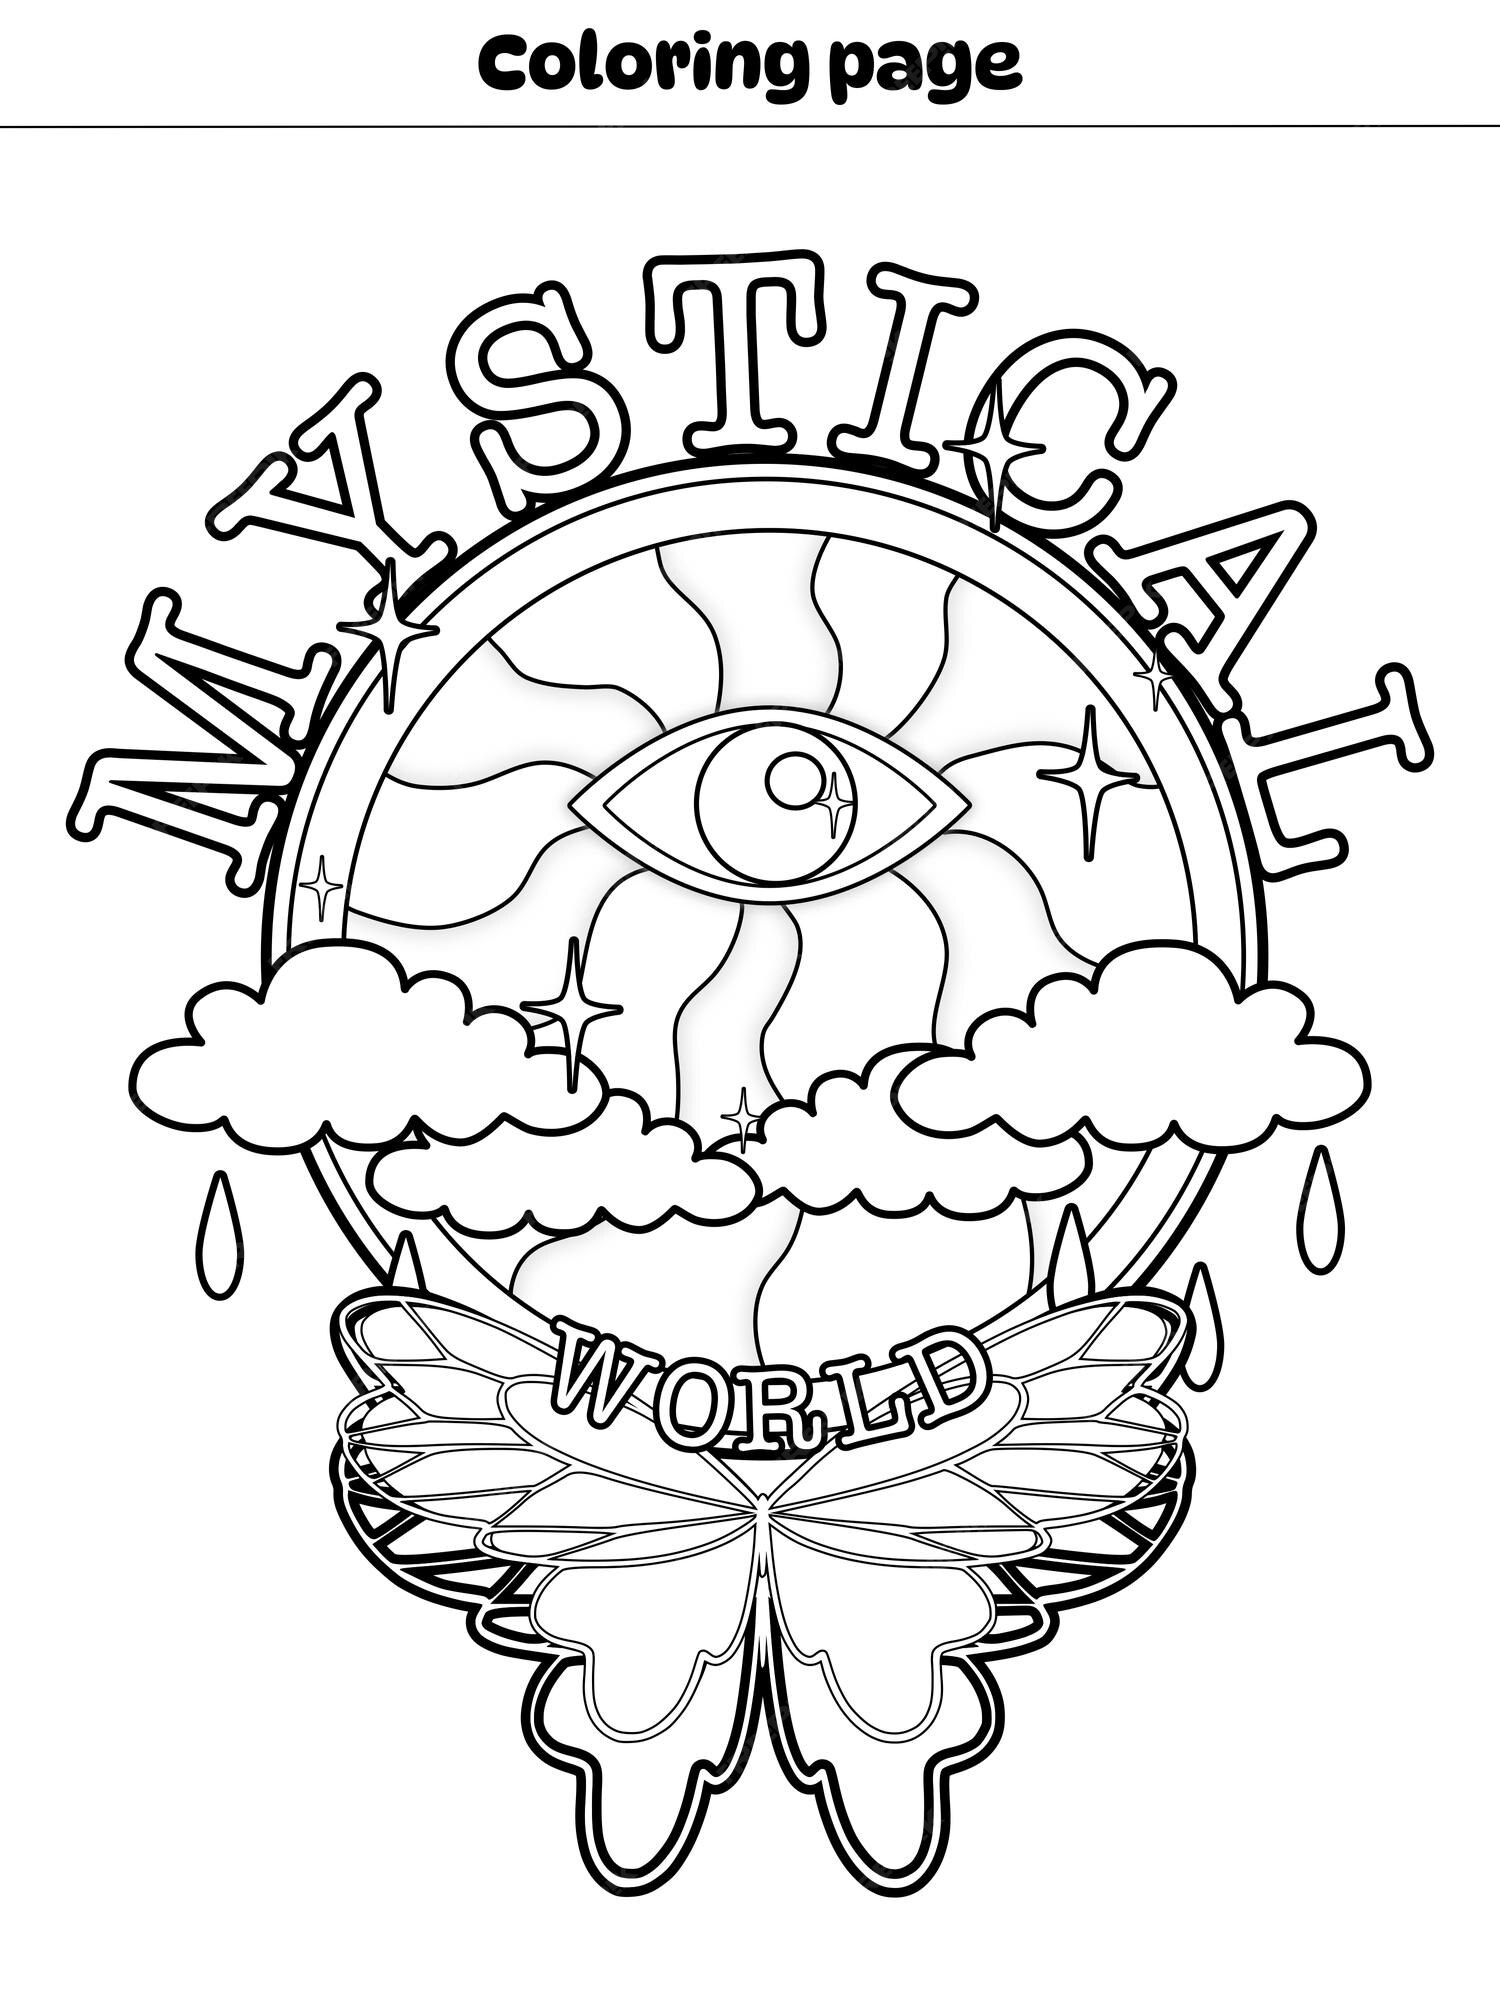 Premium vector adult coloring page with goth mystery mystical art doodles